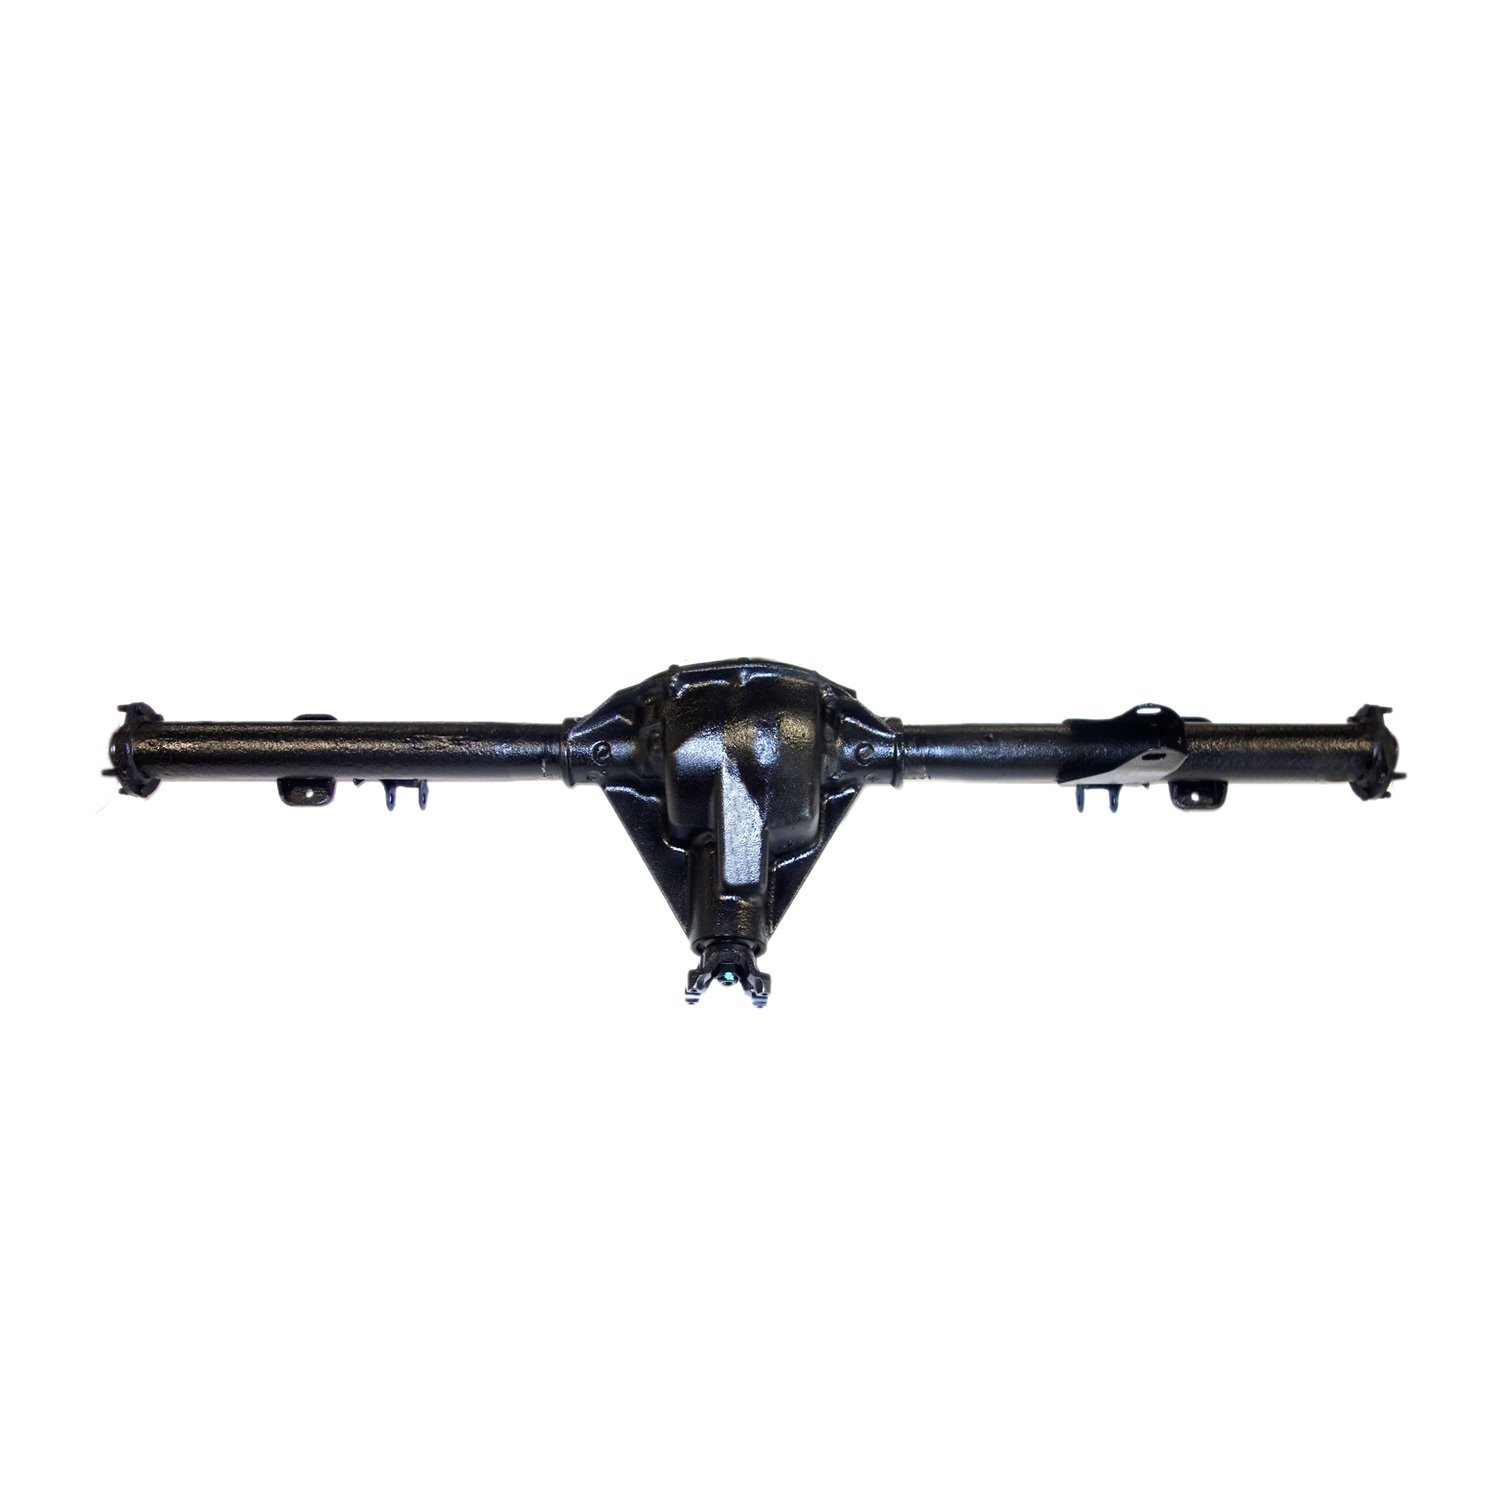 Remanufactured Complete Axle Assembly for Dana 35 90-01 Cherokee 3.55 w/o ABS, 9" Brakes